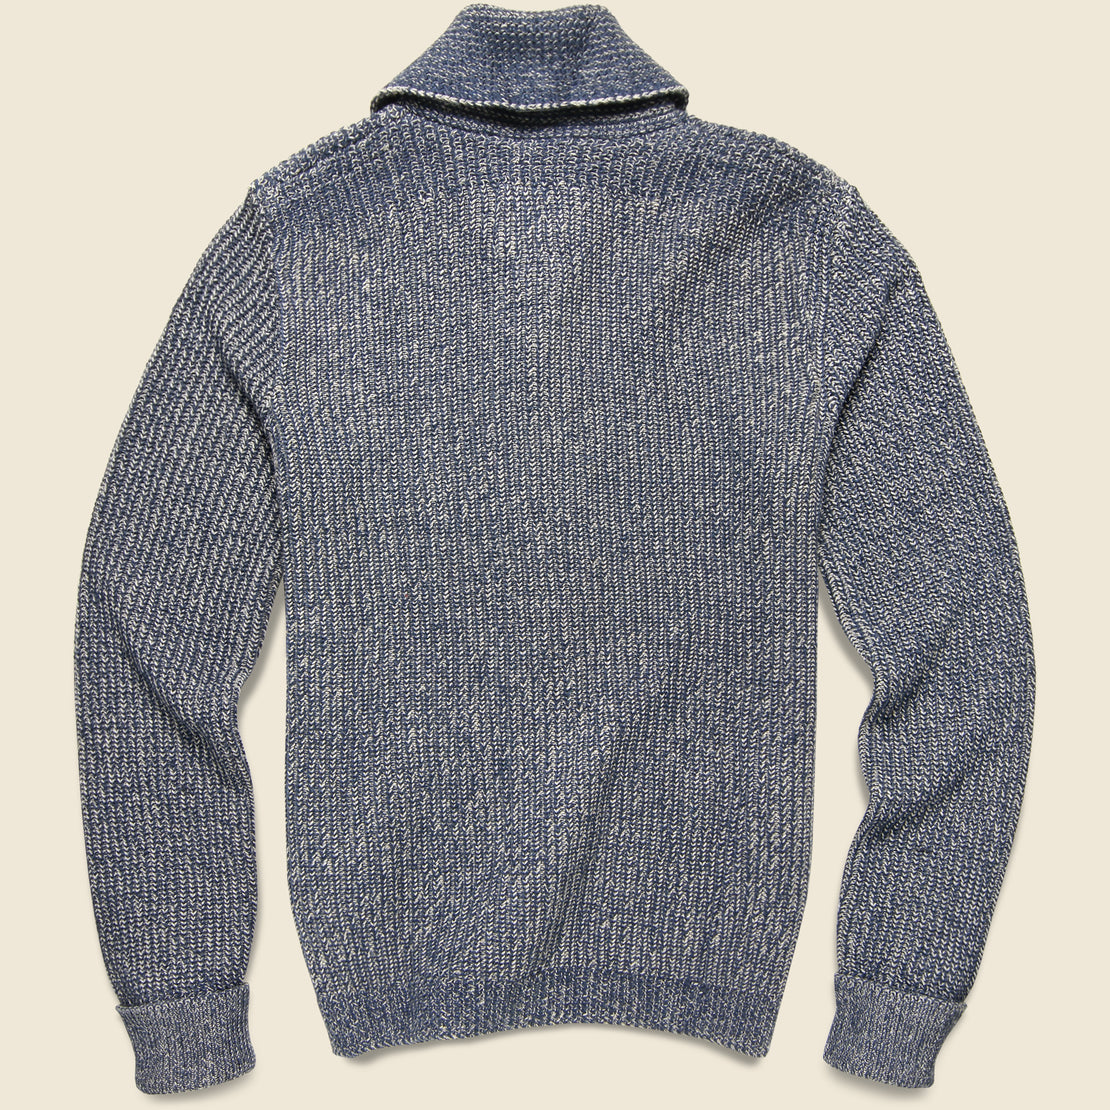 Belmont Shawl Cardigan - Blue Charcoal - Grayers - STAG Provisions - Tops - Sweater